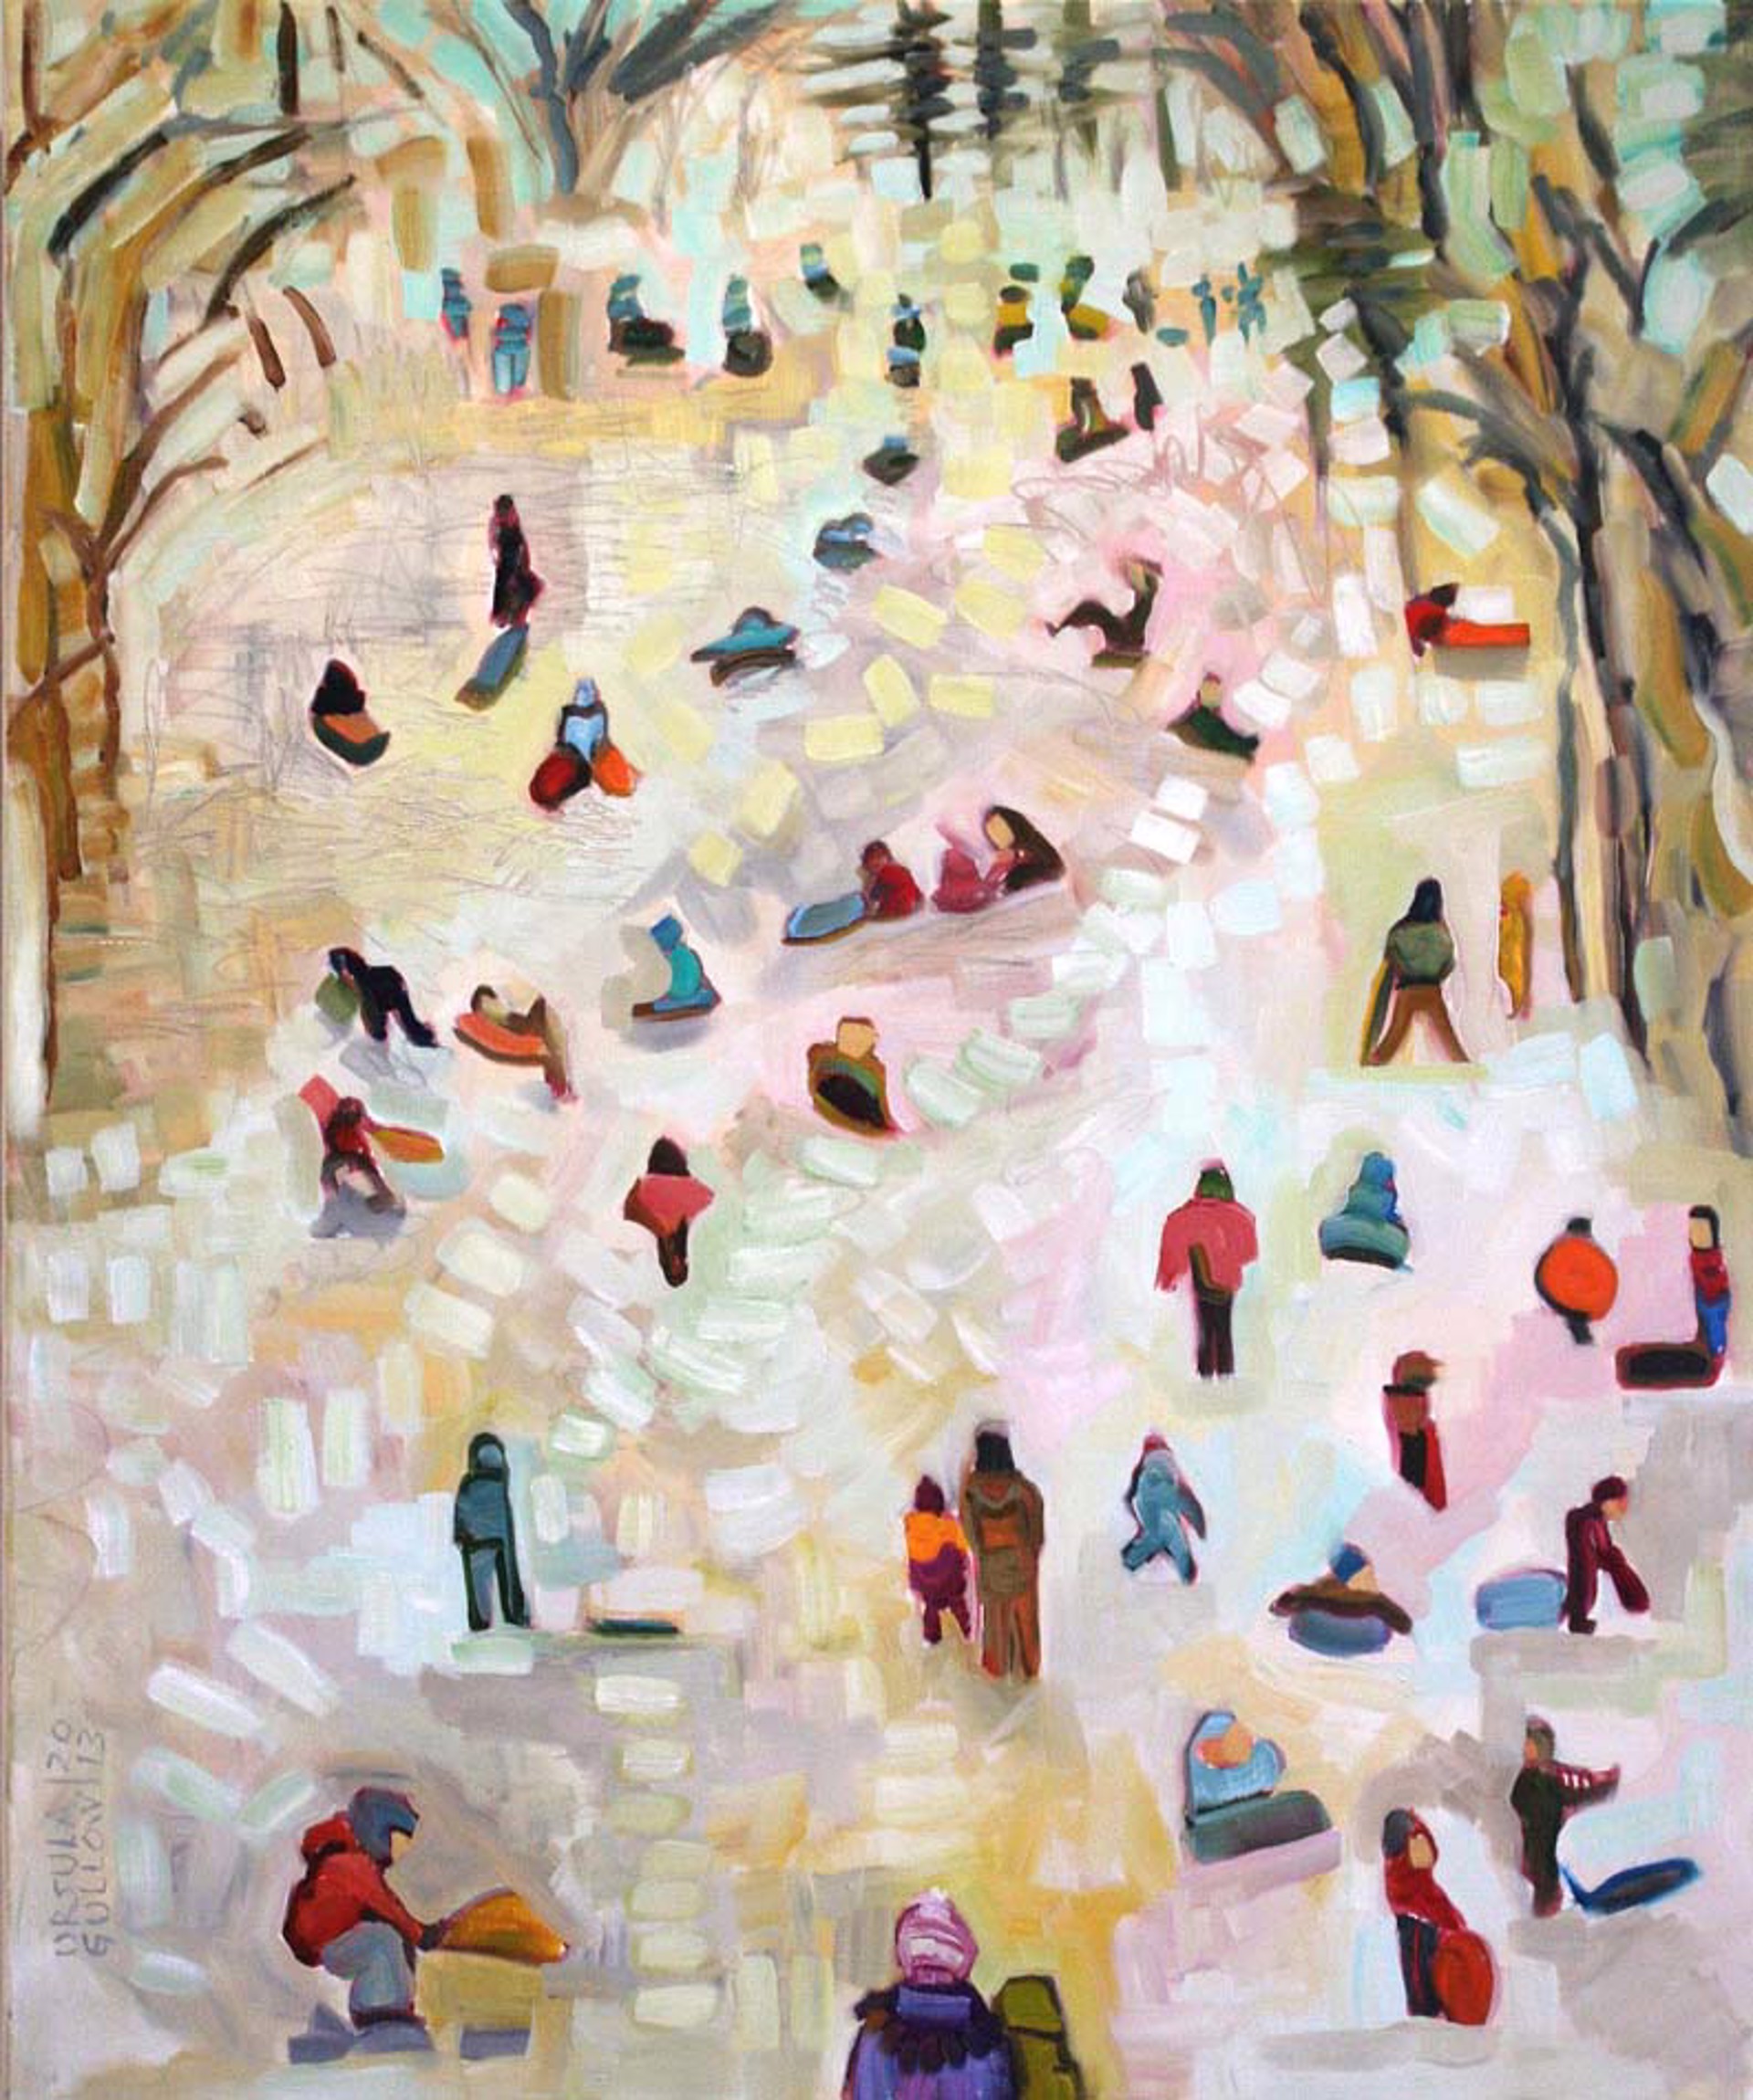 Sledders by Ursula Gullow